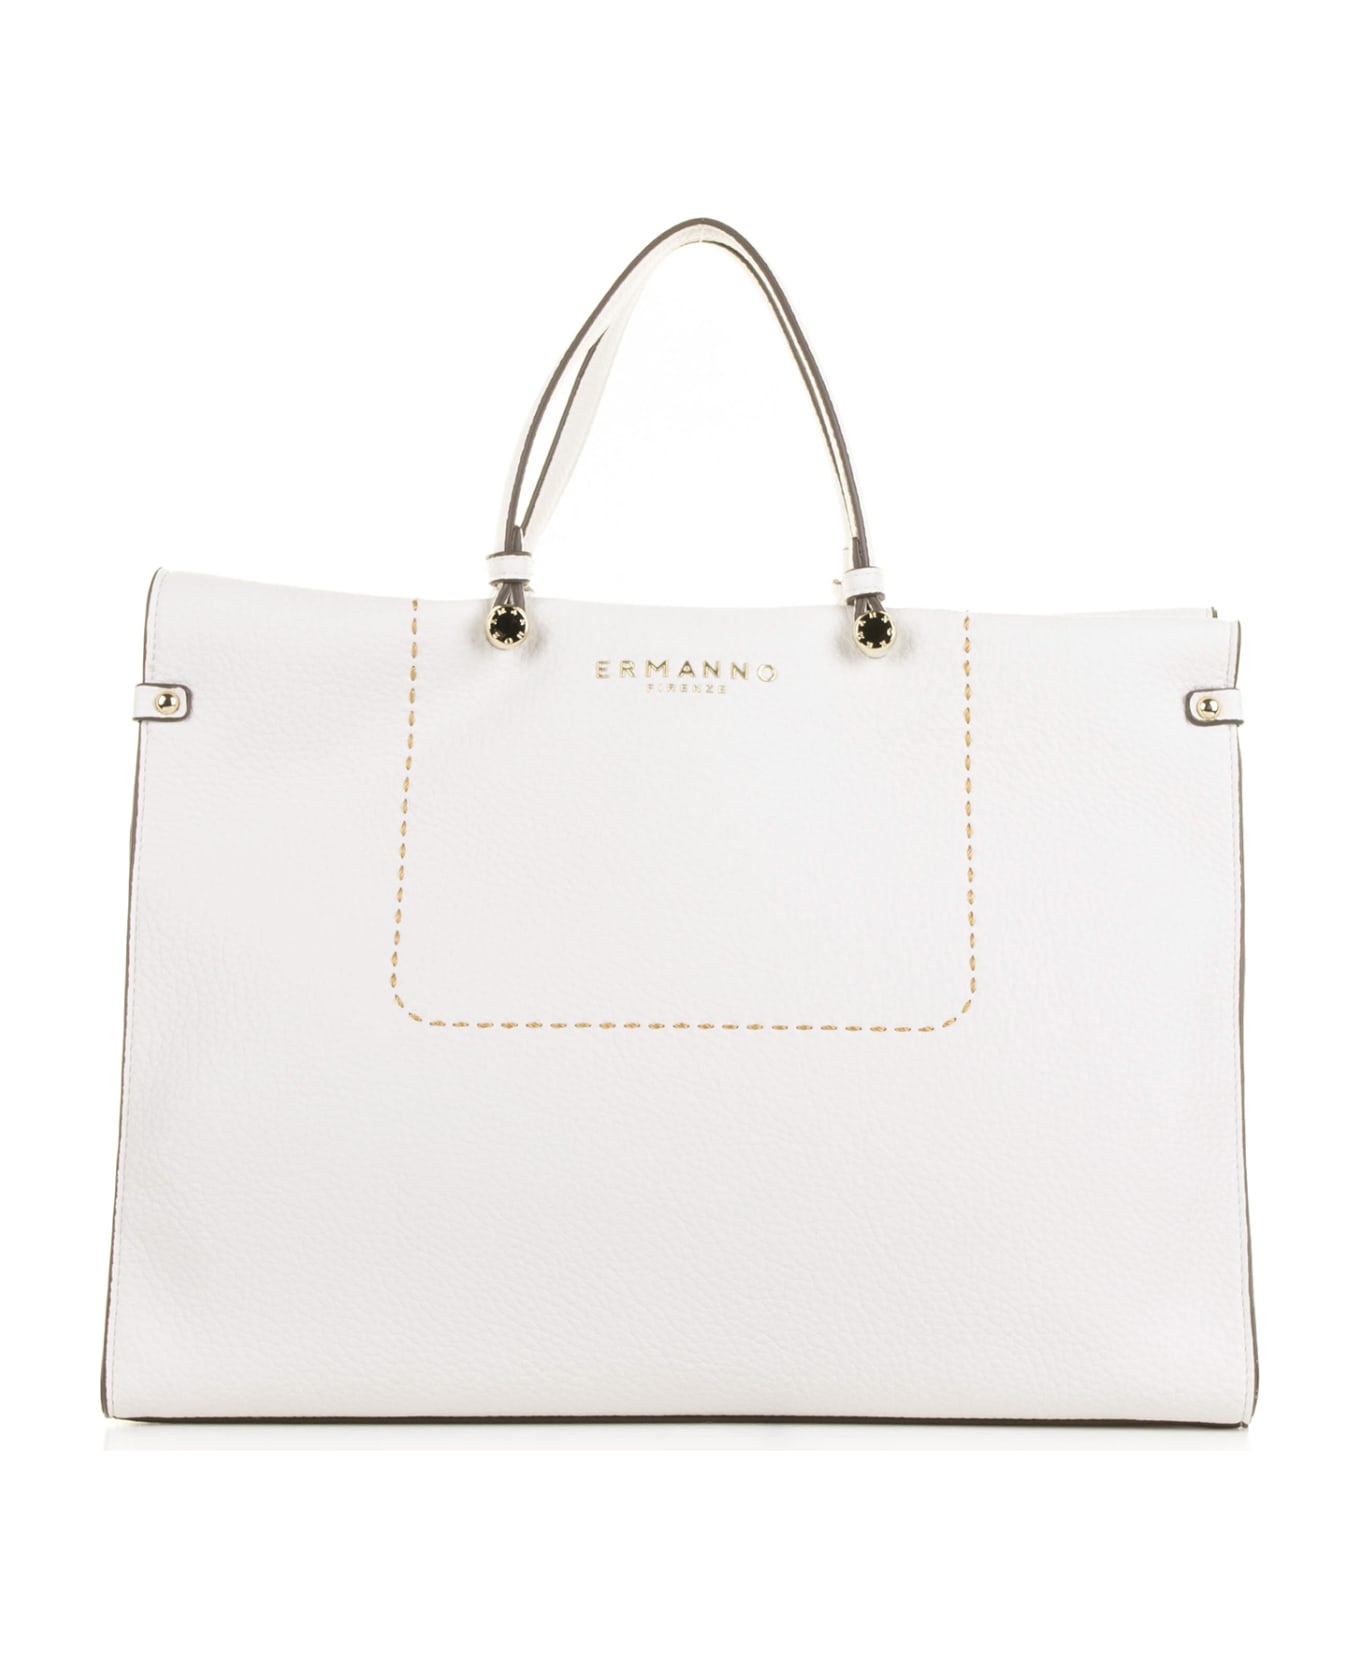 Ermanno Scervino White Petra Shopping Bag In Textured Eco-leather - BIANCO